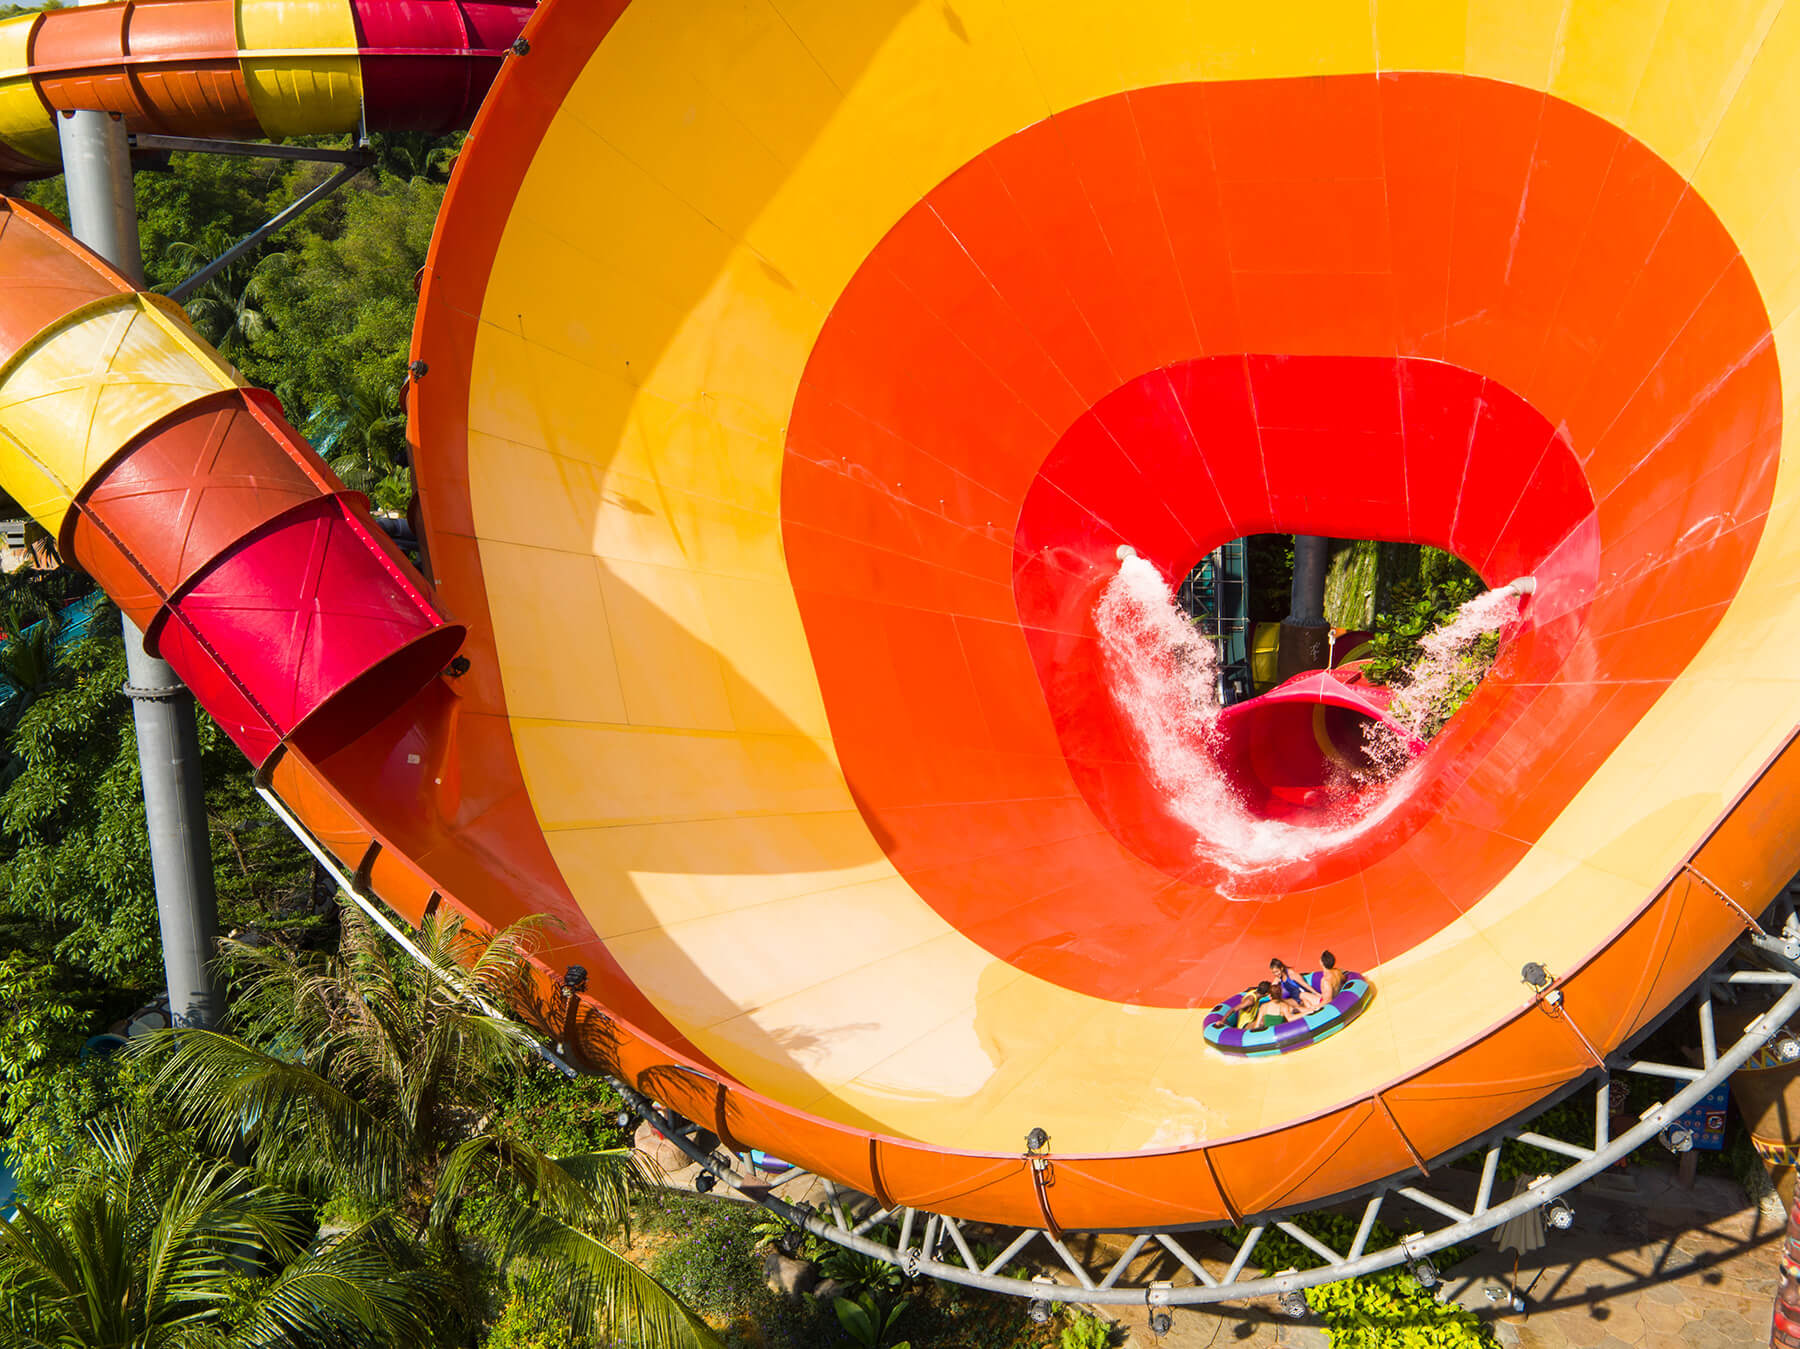 Your journey in Sunway Lagoon isn’t complete until you ride the biggest slide in the world - the Vuvuzela!